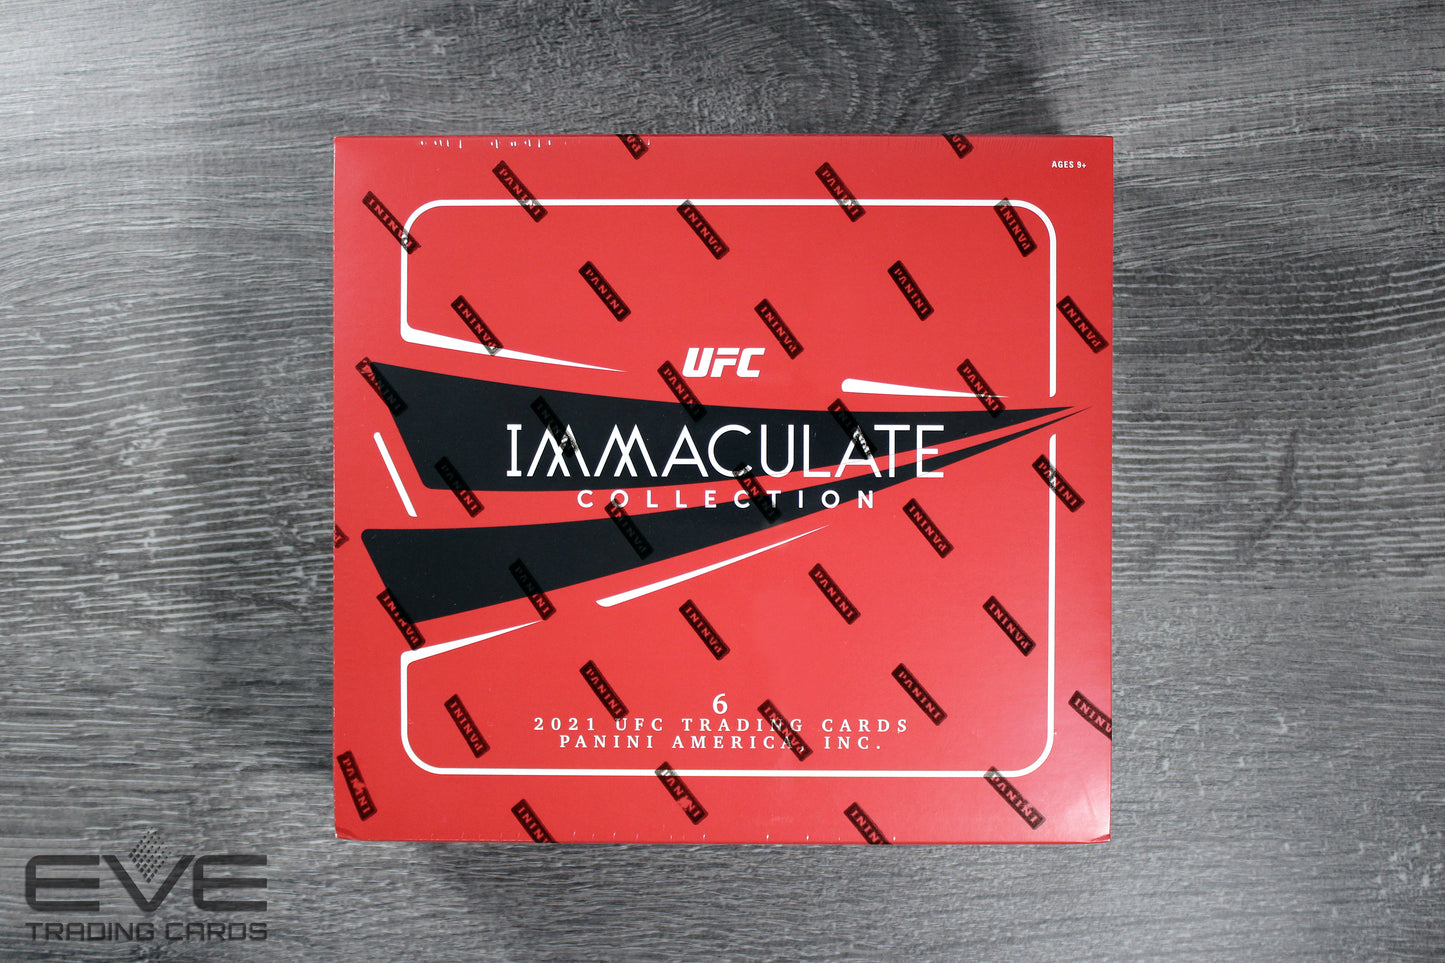 2021 Panini Immaculate UFC Trading Cards Hobby Box